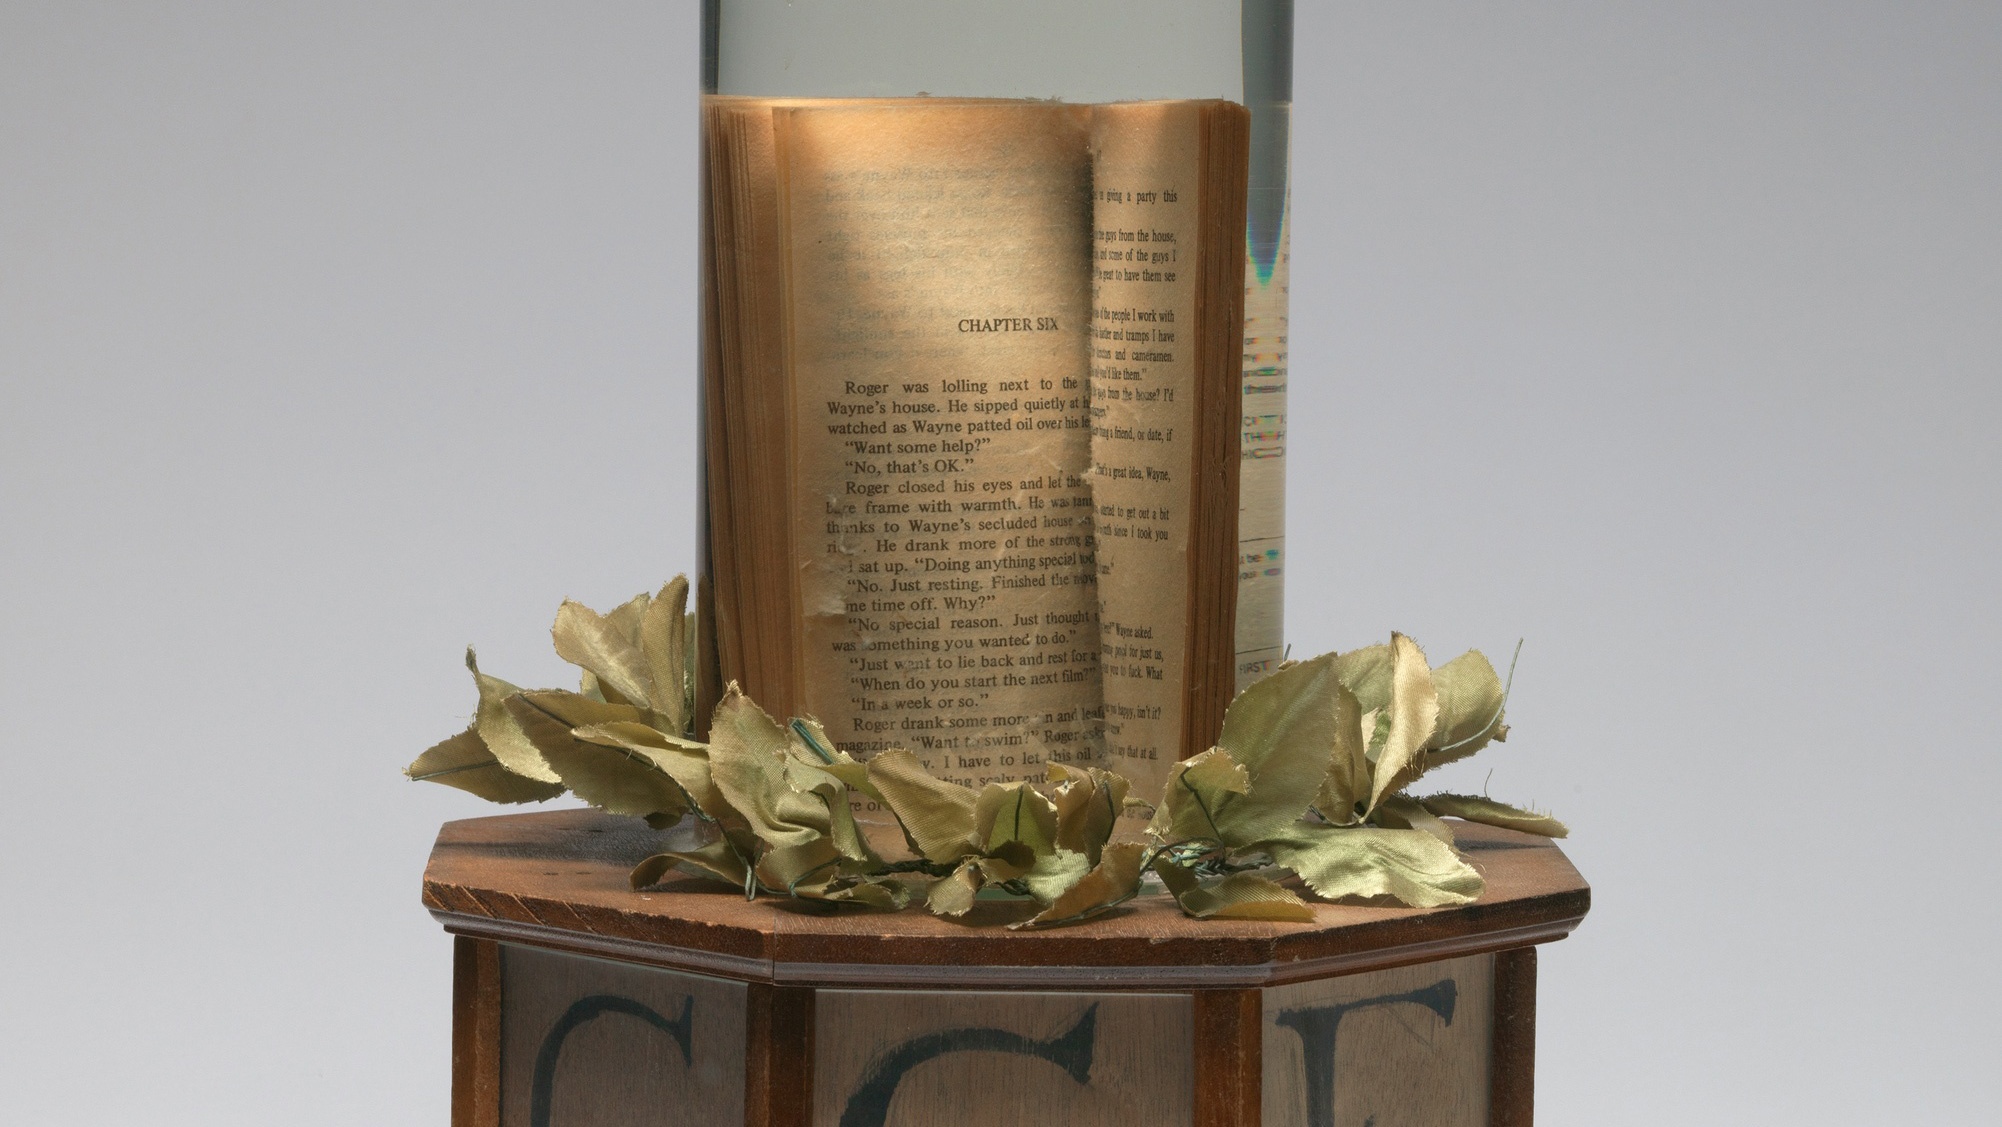 Atop a wooden pedestal is fake greenery at the base of a glass jar containing an open book in water.